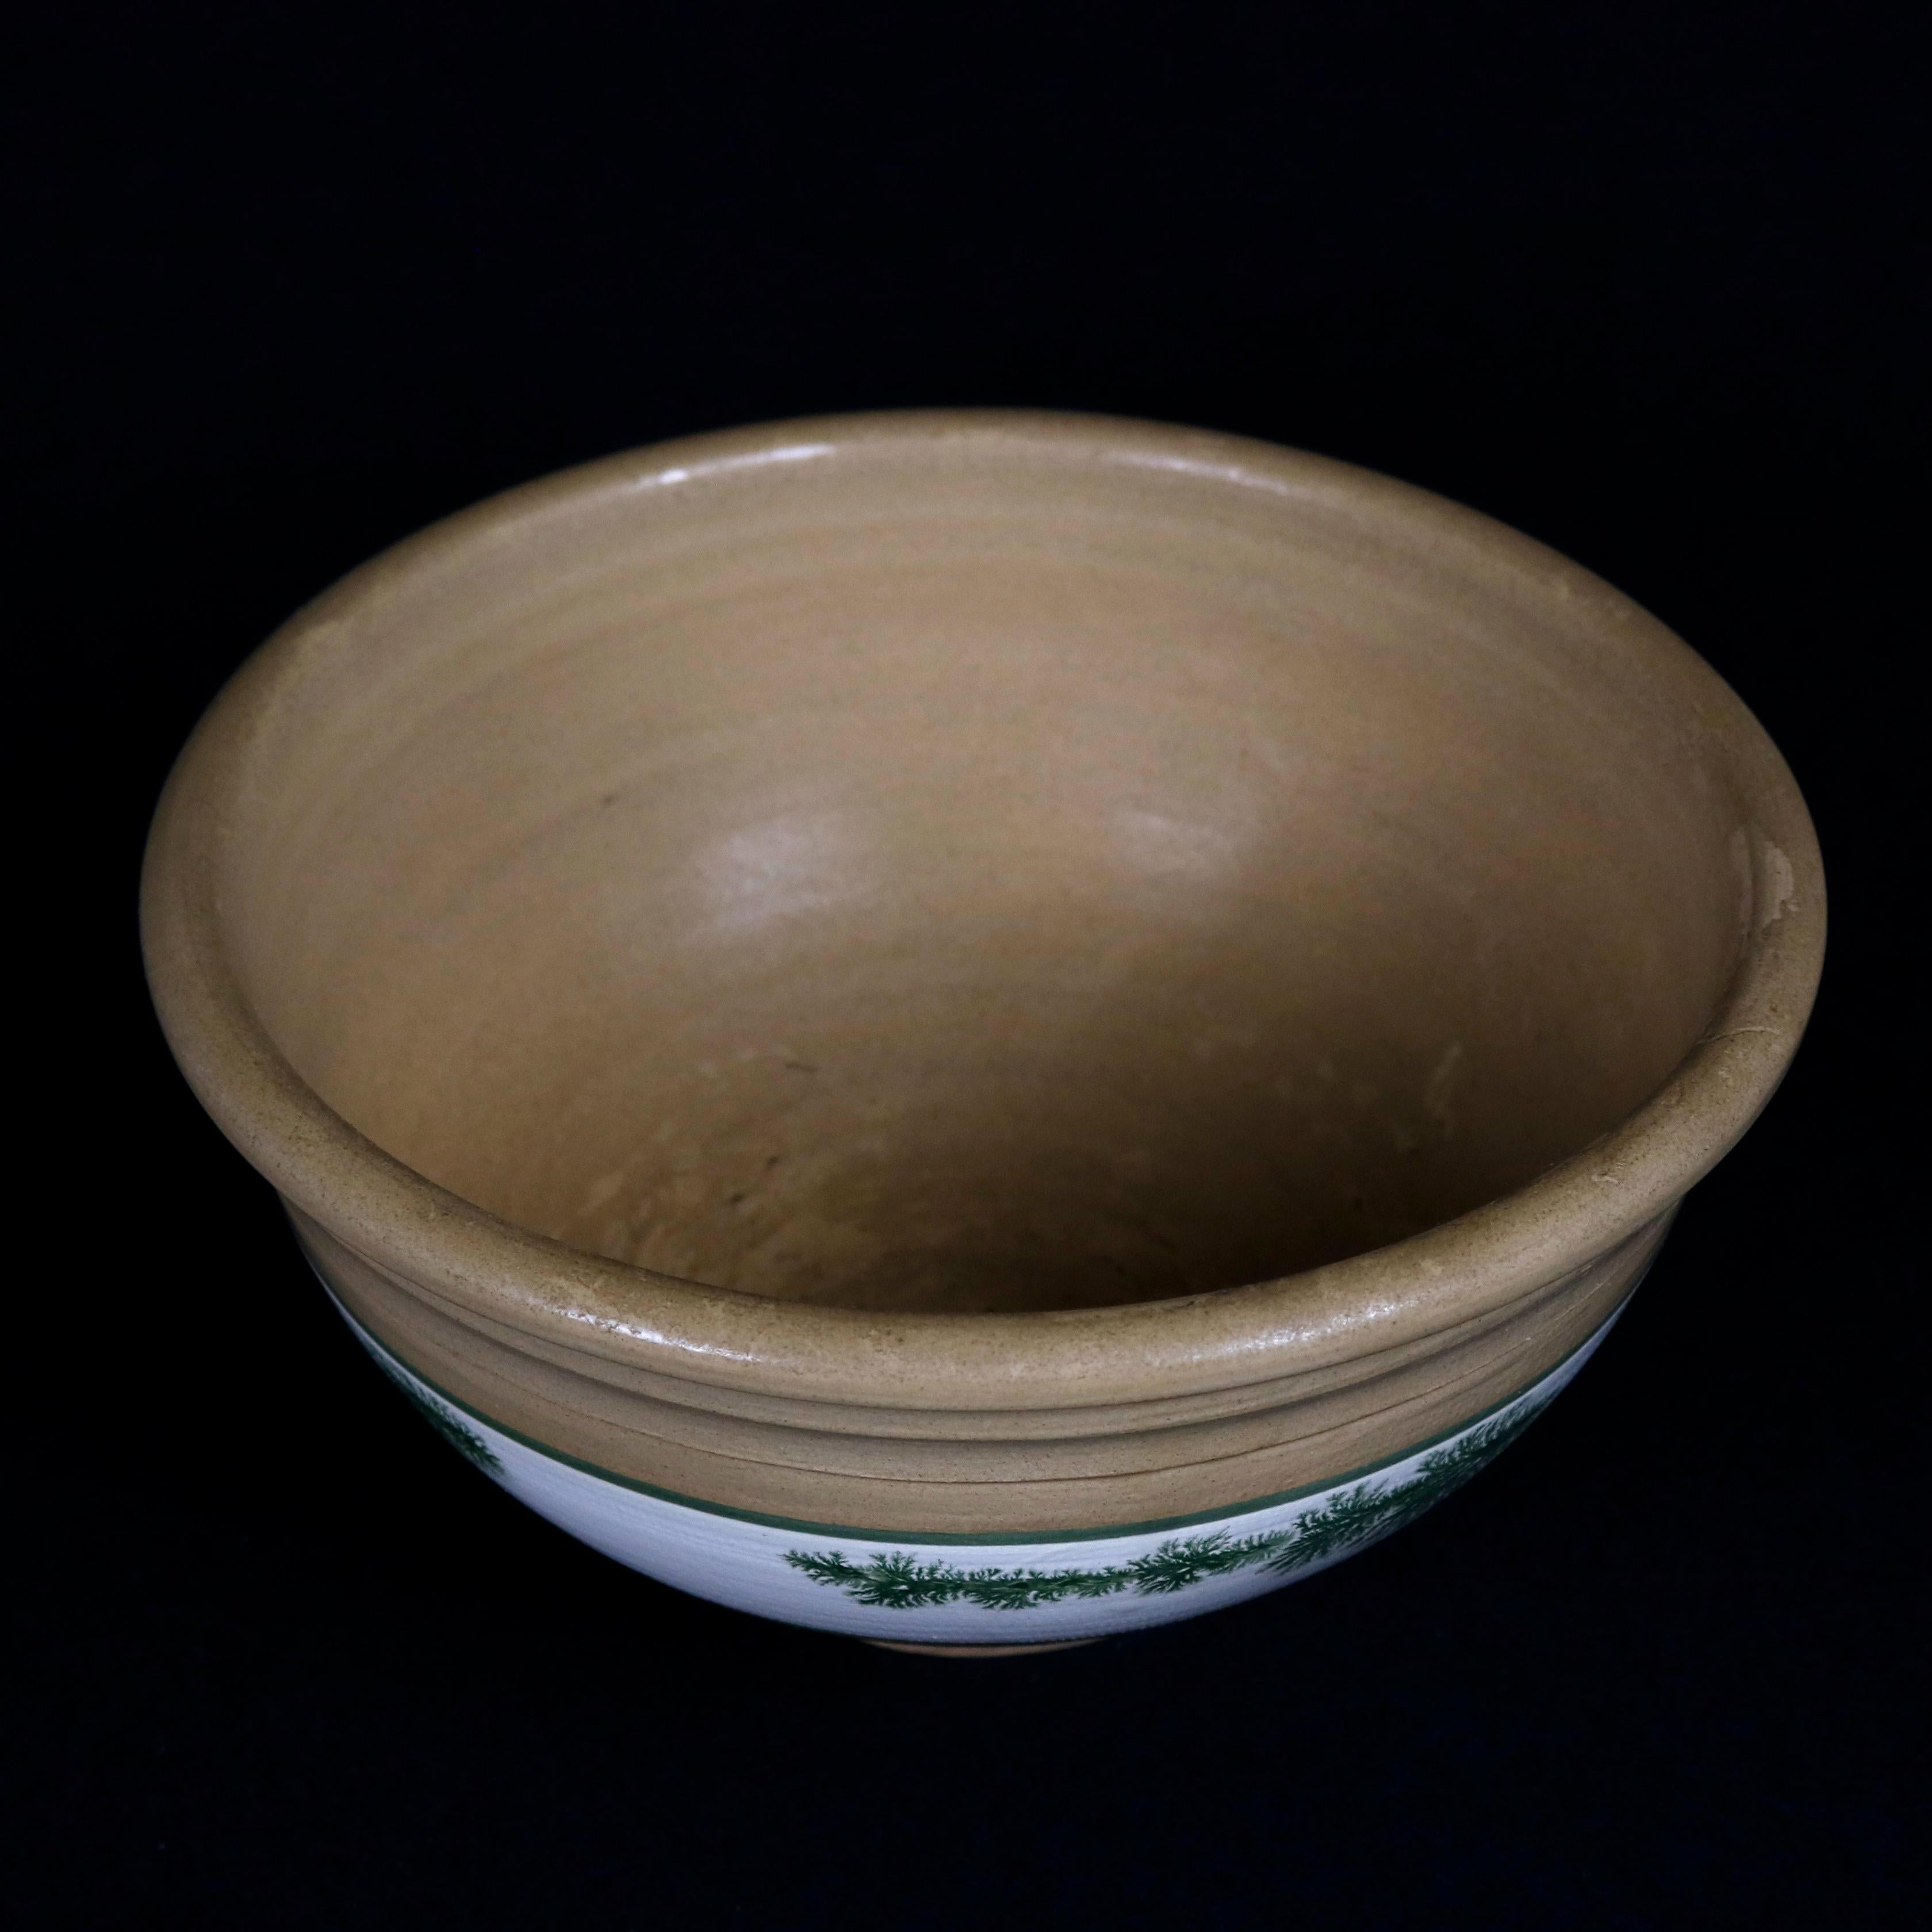 Nested Set of 3 Seaweed Mocha Decorated Pottery Mixing Bowls, 20th Century (amerikanisch)